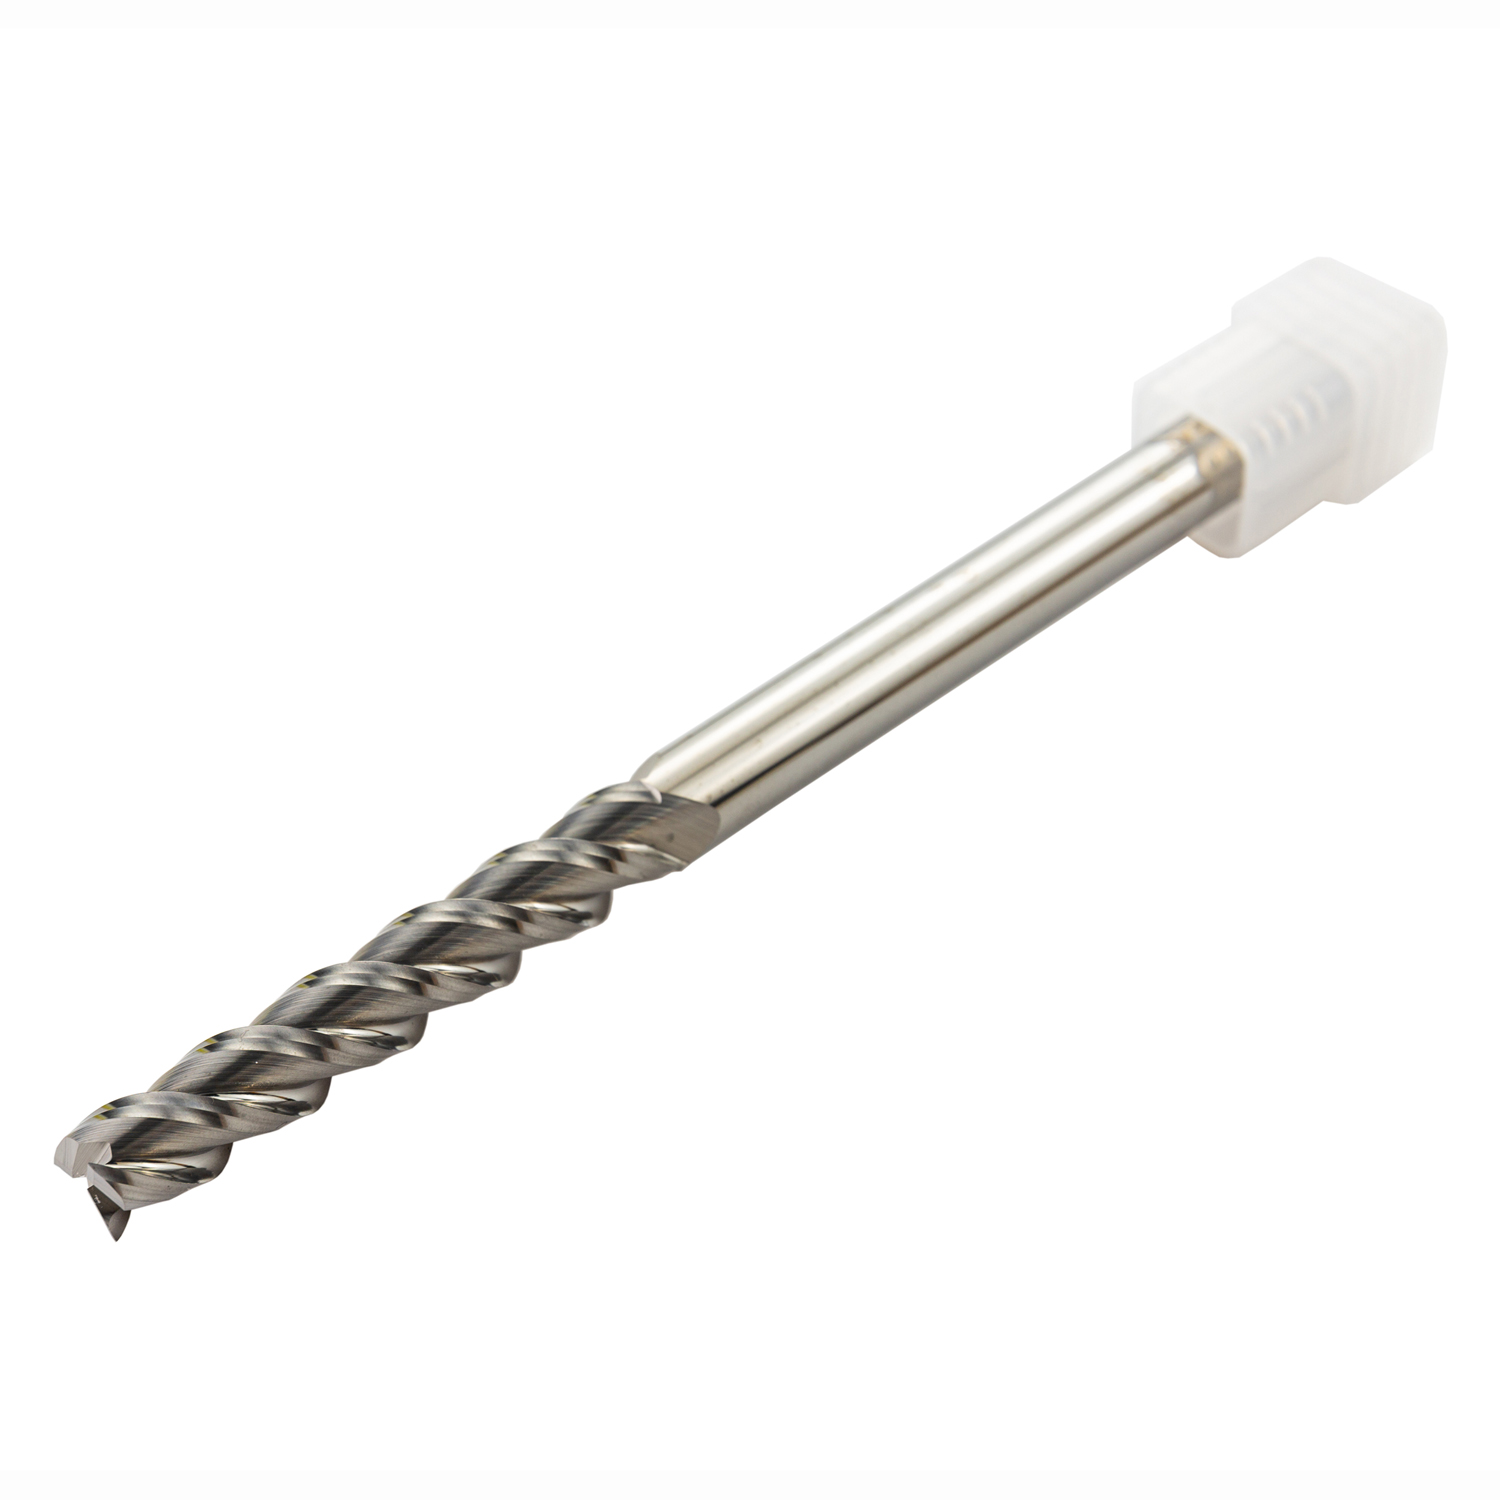 RV End mills for aluminum processing